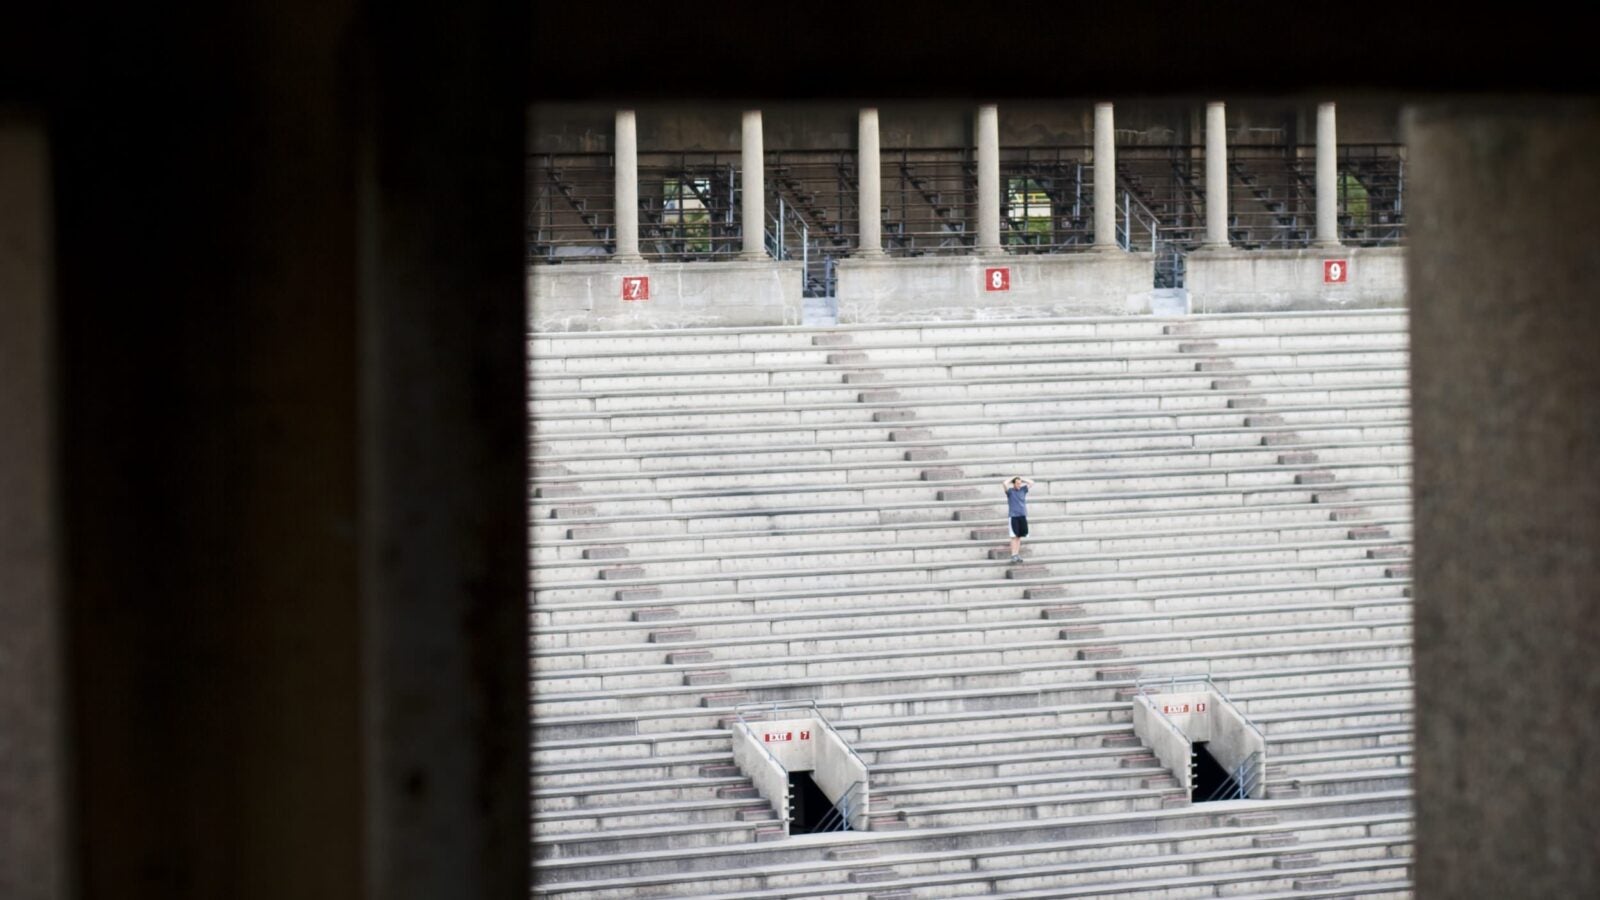 A runner stands on the steps of Harvard Stadium stairs.